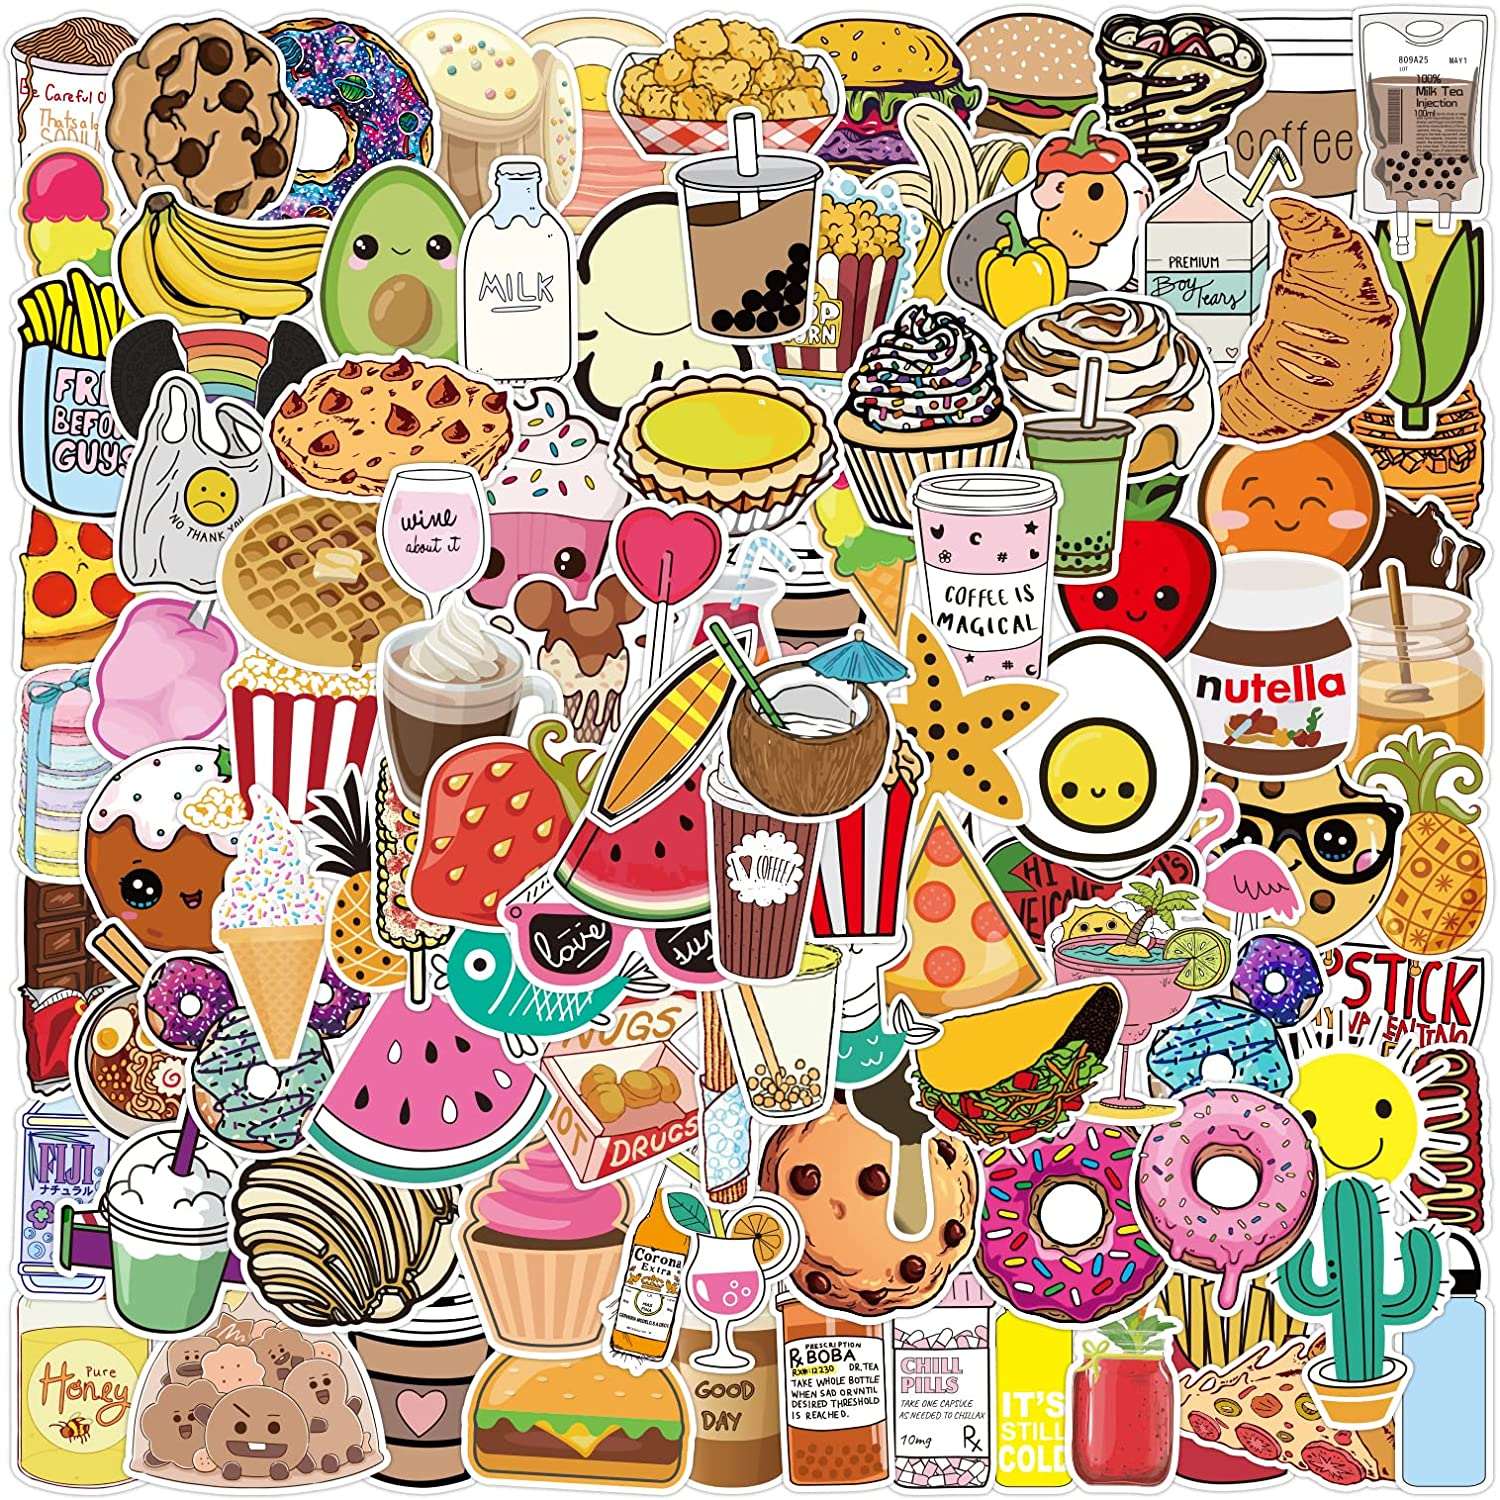 The Indie Food Stickers is a simple and interesting sticker.